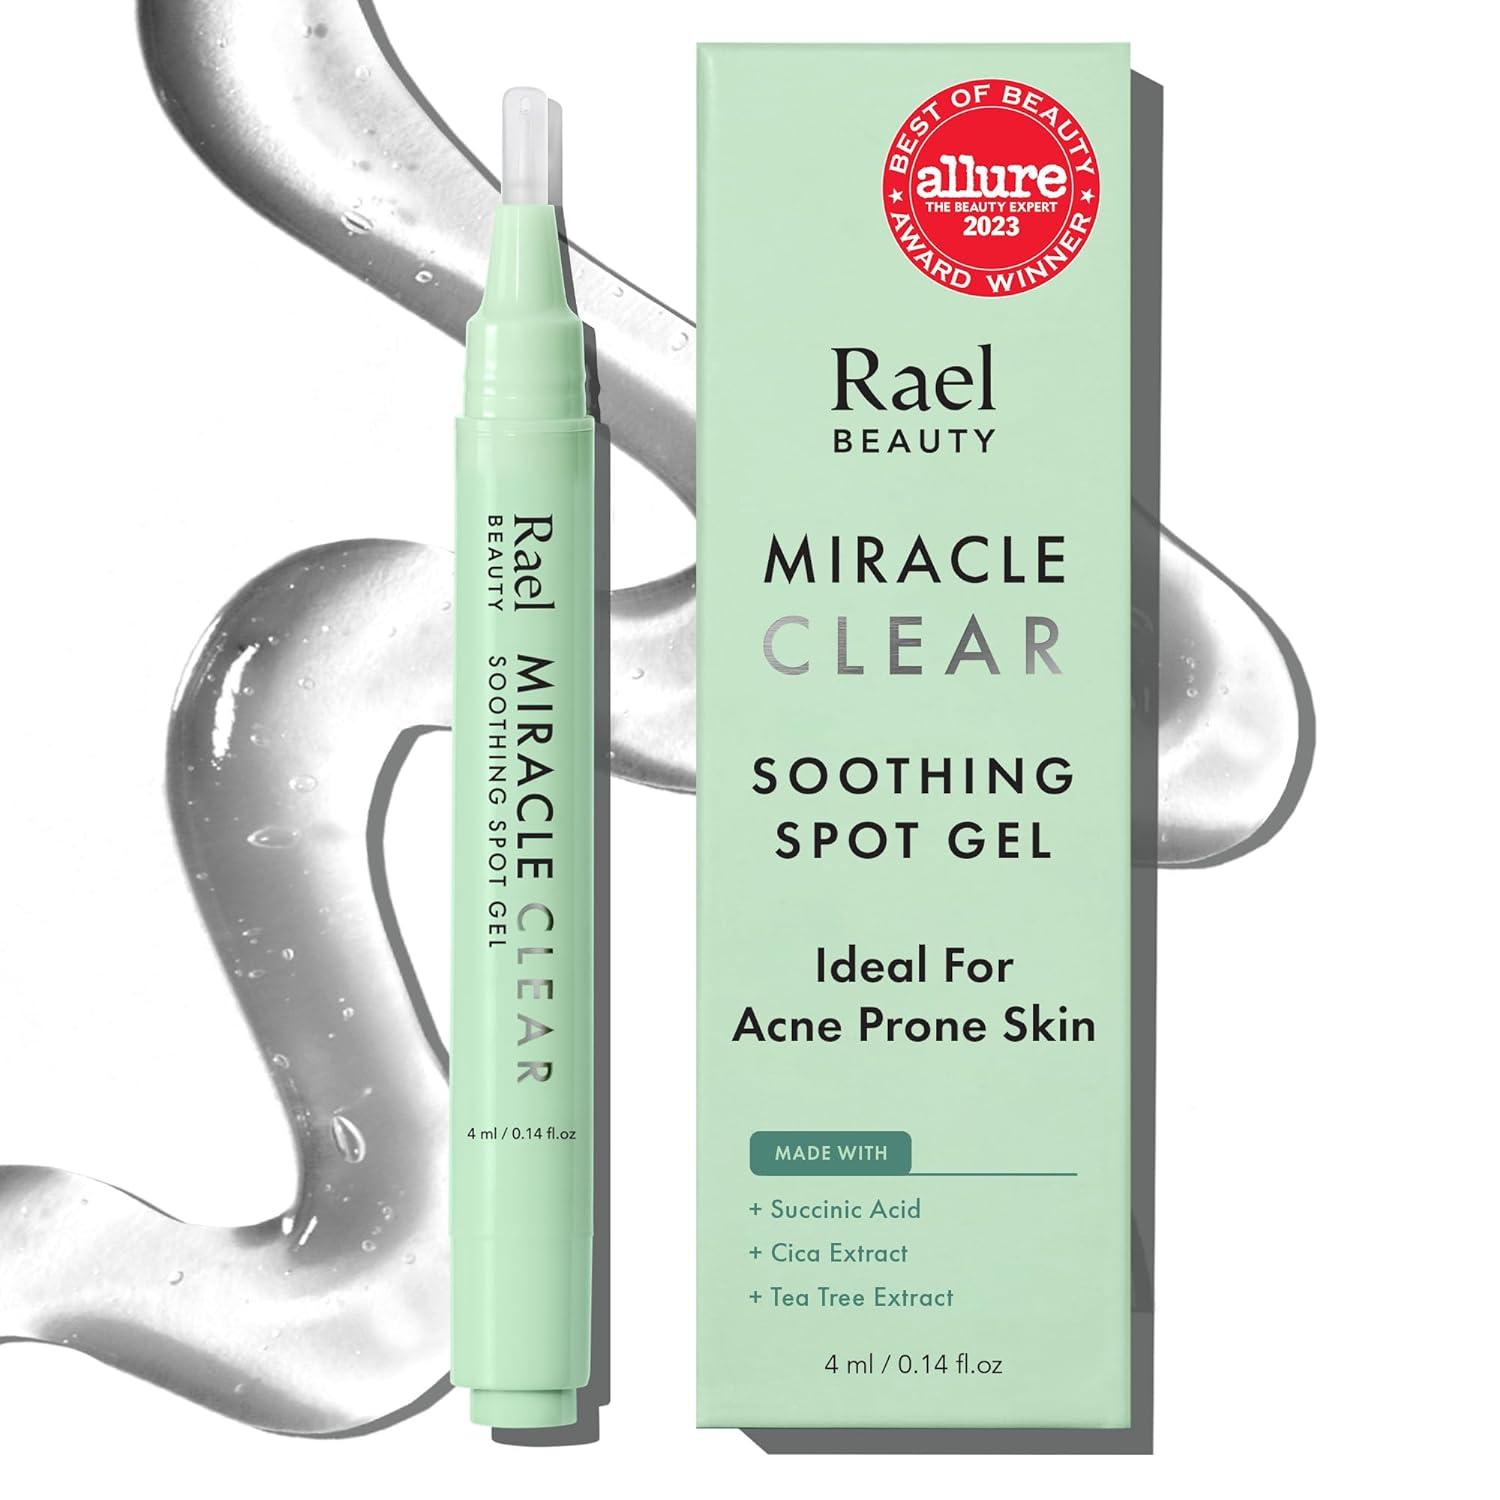 Rael Acne Spot Treatment, Miracle Clear Soothing Spot Gel Pen - Acne Gel, Pimple and Blemish Treatment, Korean Skincare, for Early Stage, Succinic Acid, Tea Tree, Cica, Vegan, Cruelty Free (0.14 oz)